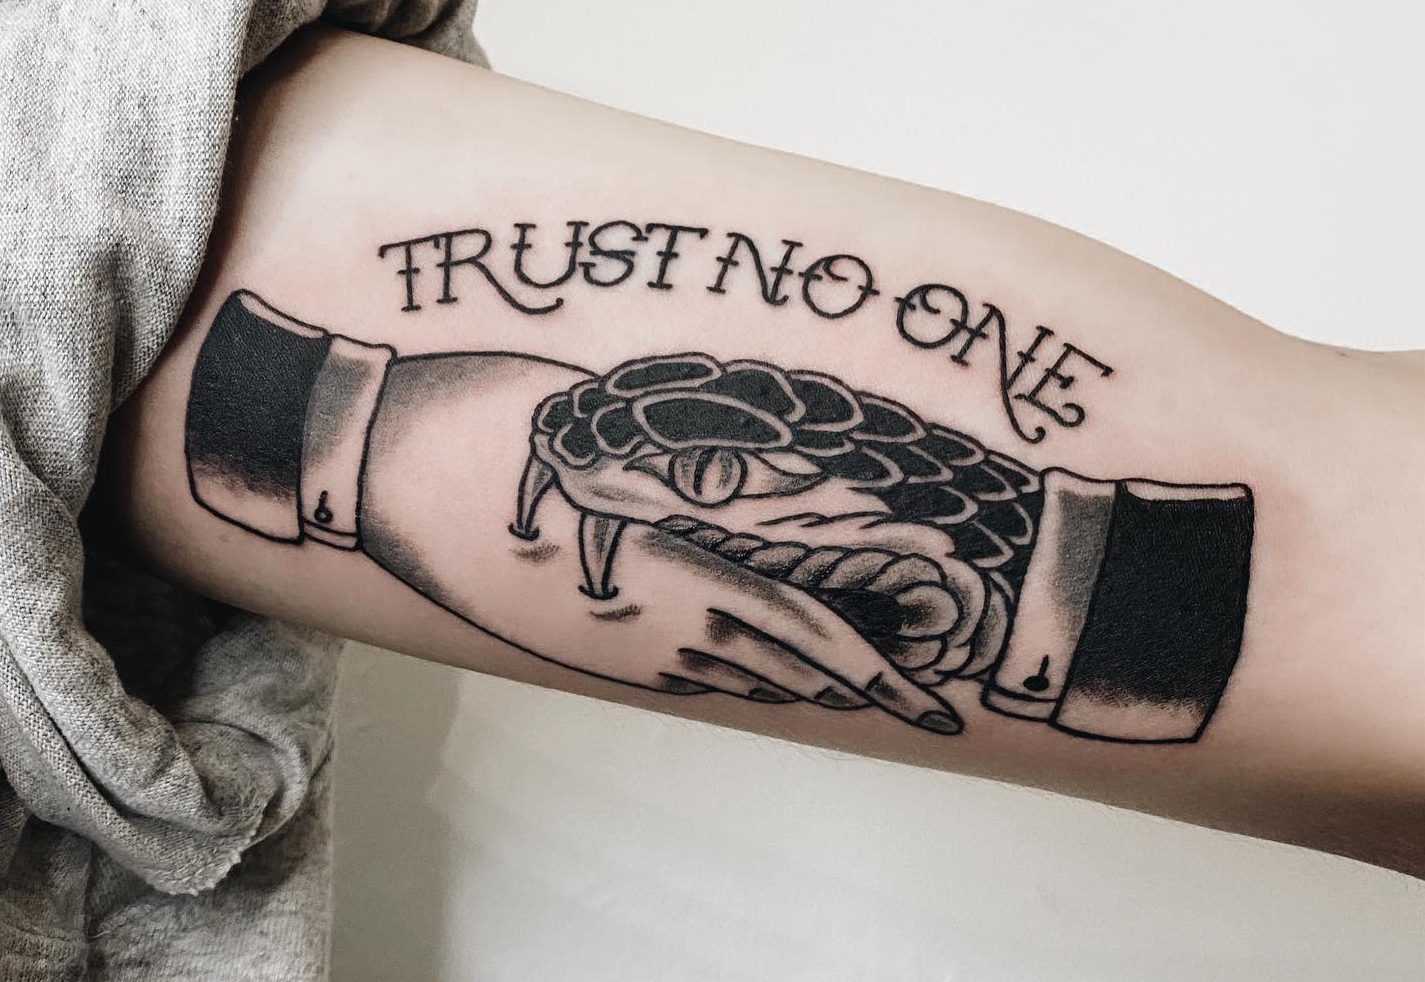 Top 69 Best Trust No One Tattoo Ideas 2021 Inspiration Guide